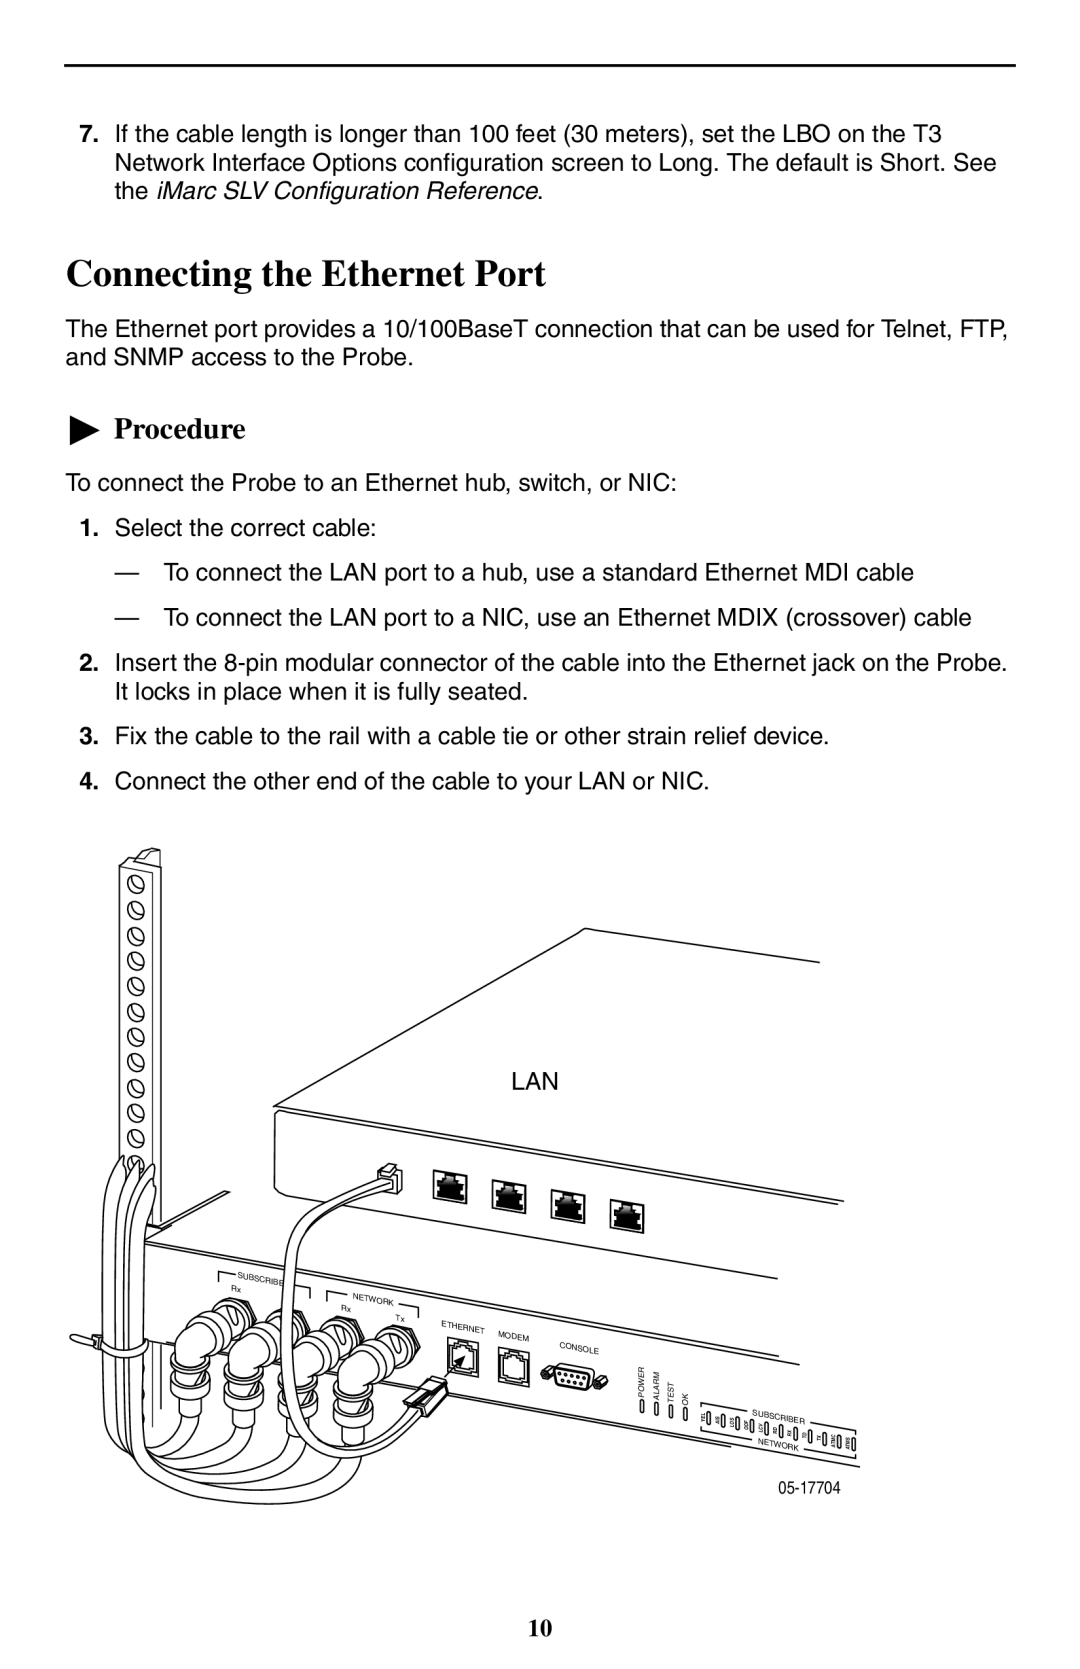 Paradyne 9550 DS3 installation instructions Connecting the Ethernet Port, Procedure 